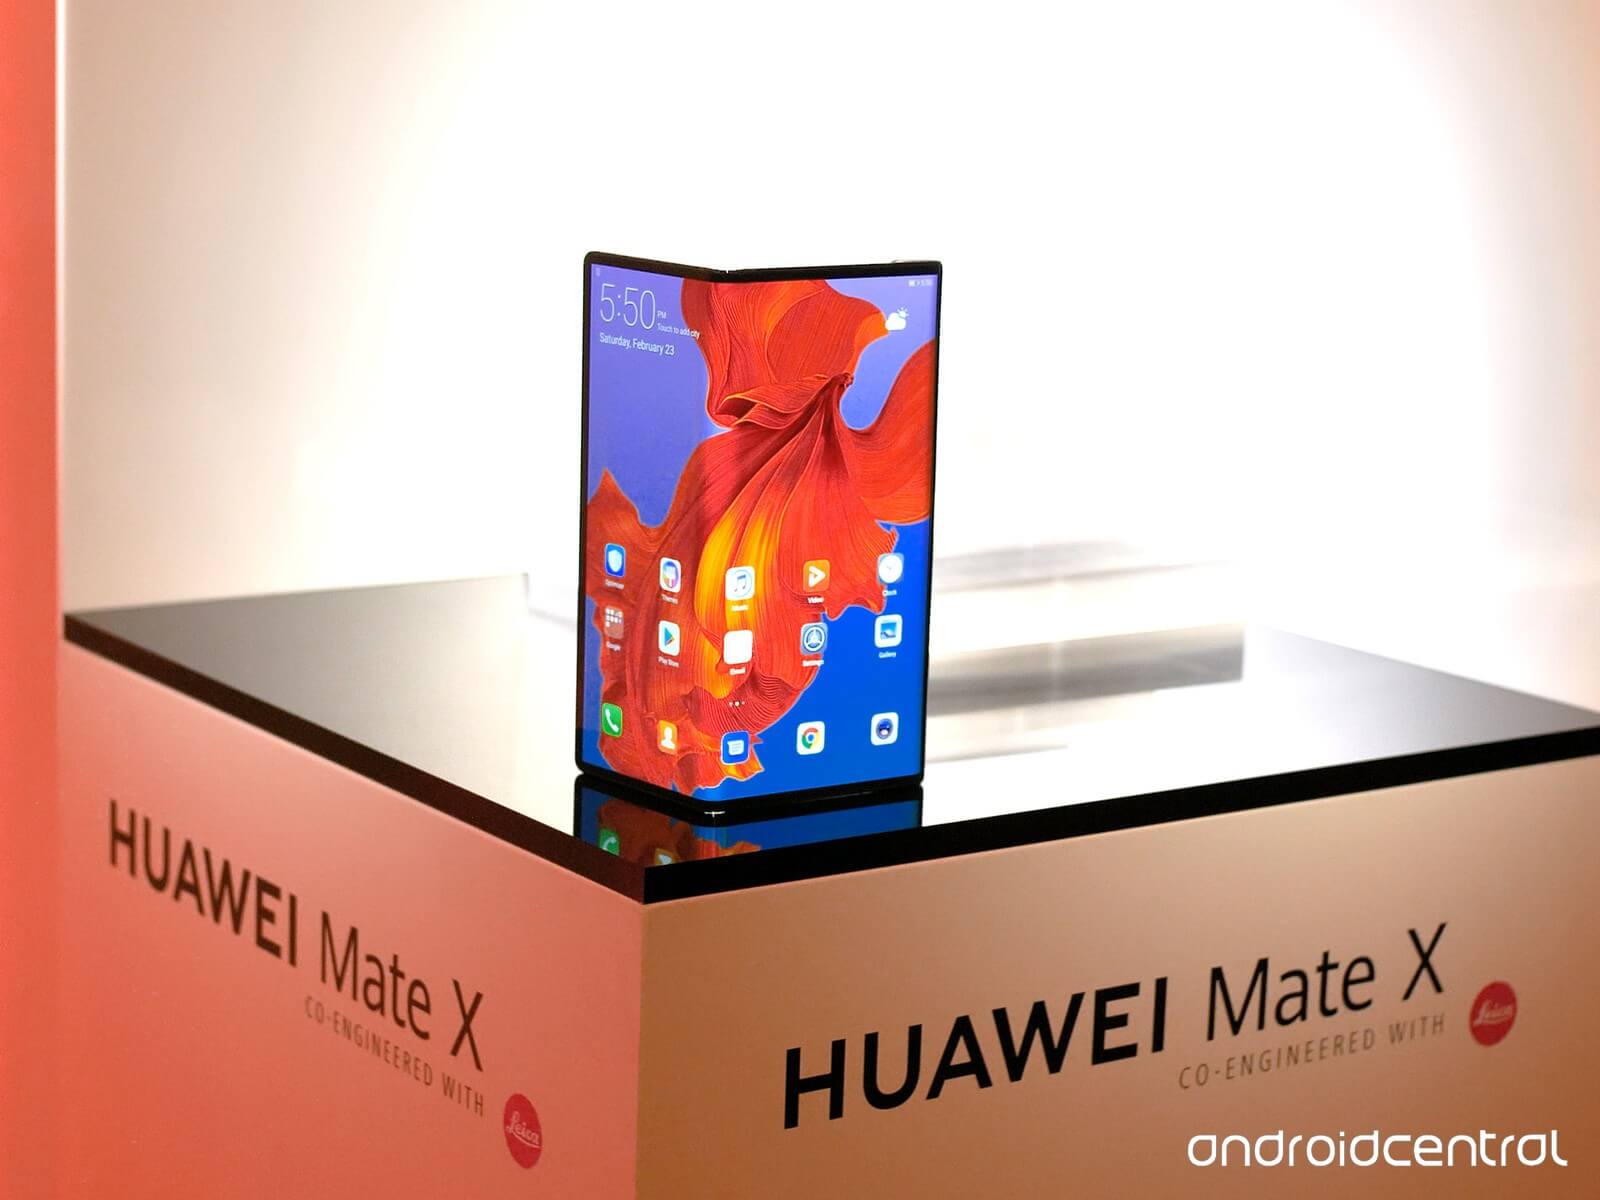 New Huawei Mate X smartphone at Mobile World Congress 2019